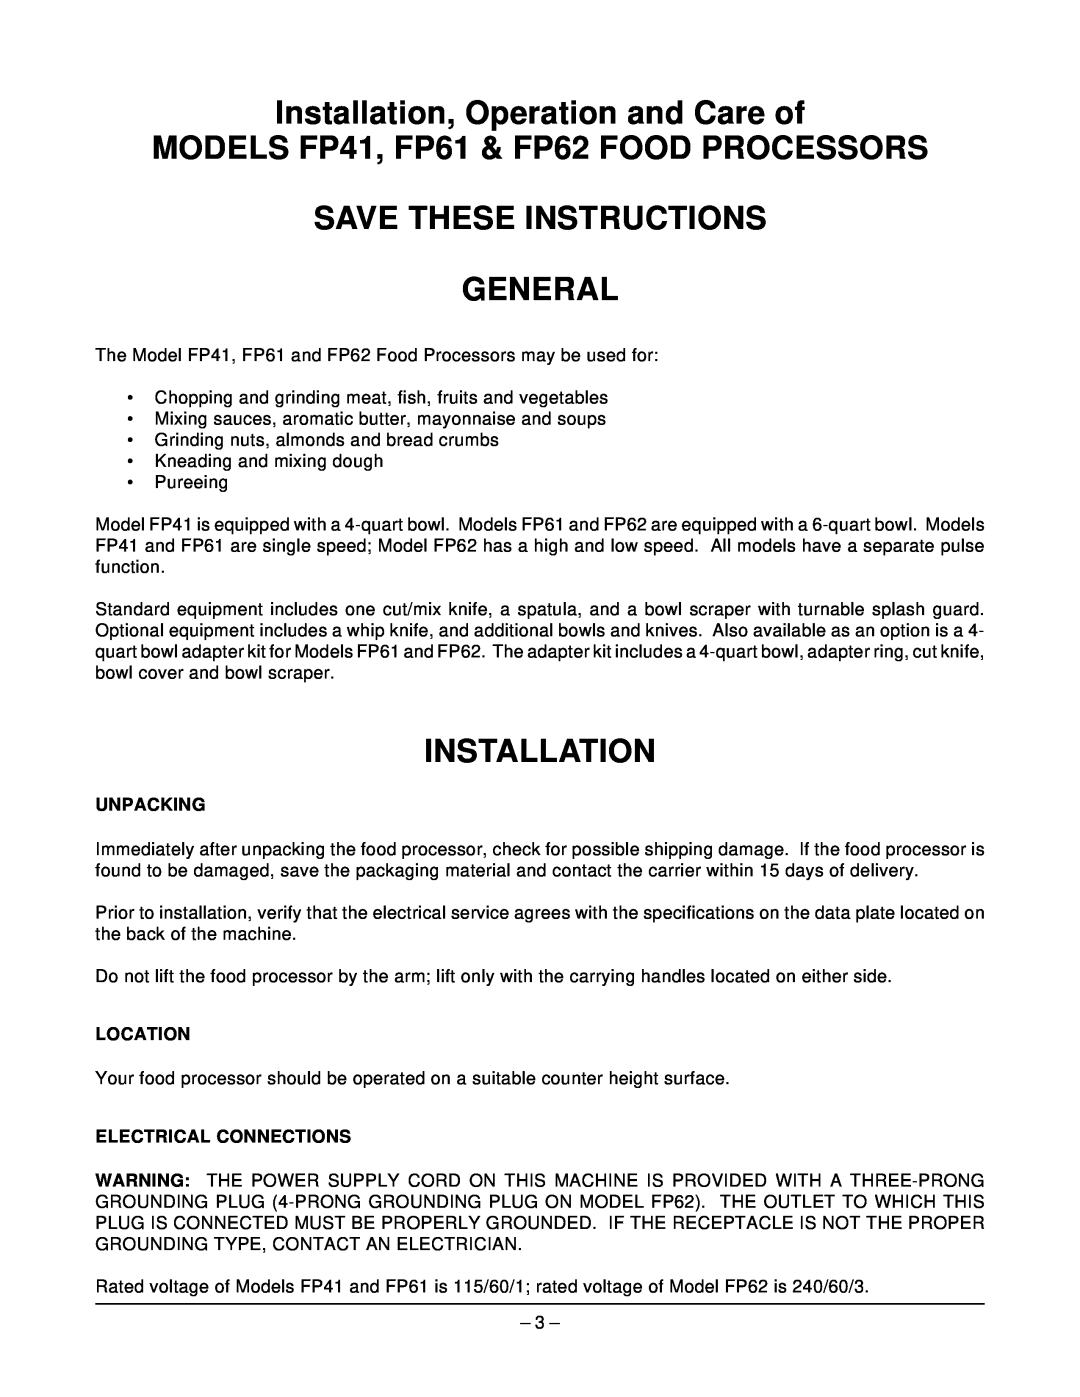 Hobart Installation, Operation and Care of, MODELS FP41, FP61 & FP62 FOOD PROCESSORS, Save These Instructions General 